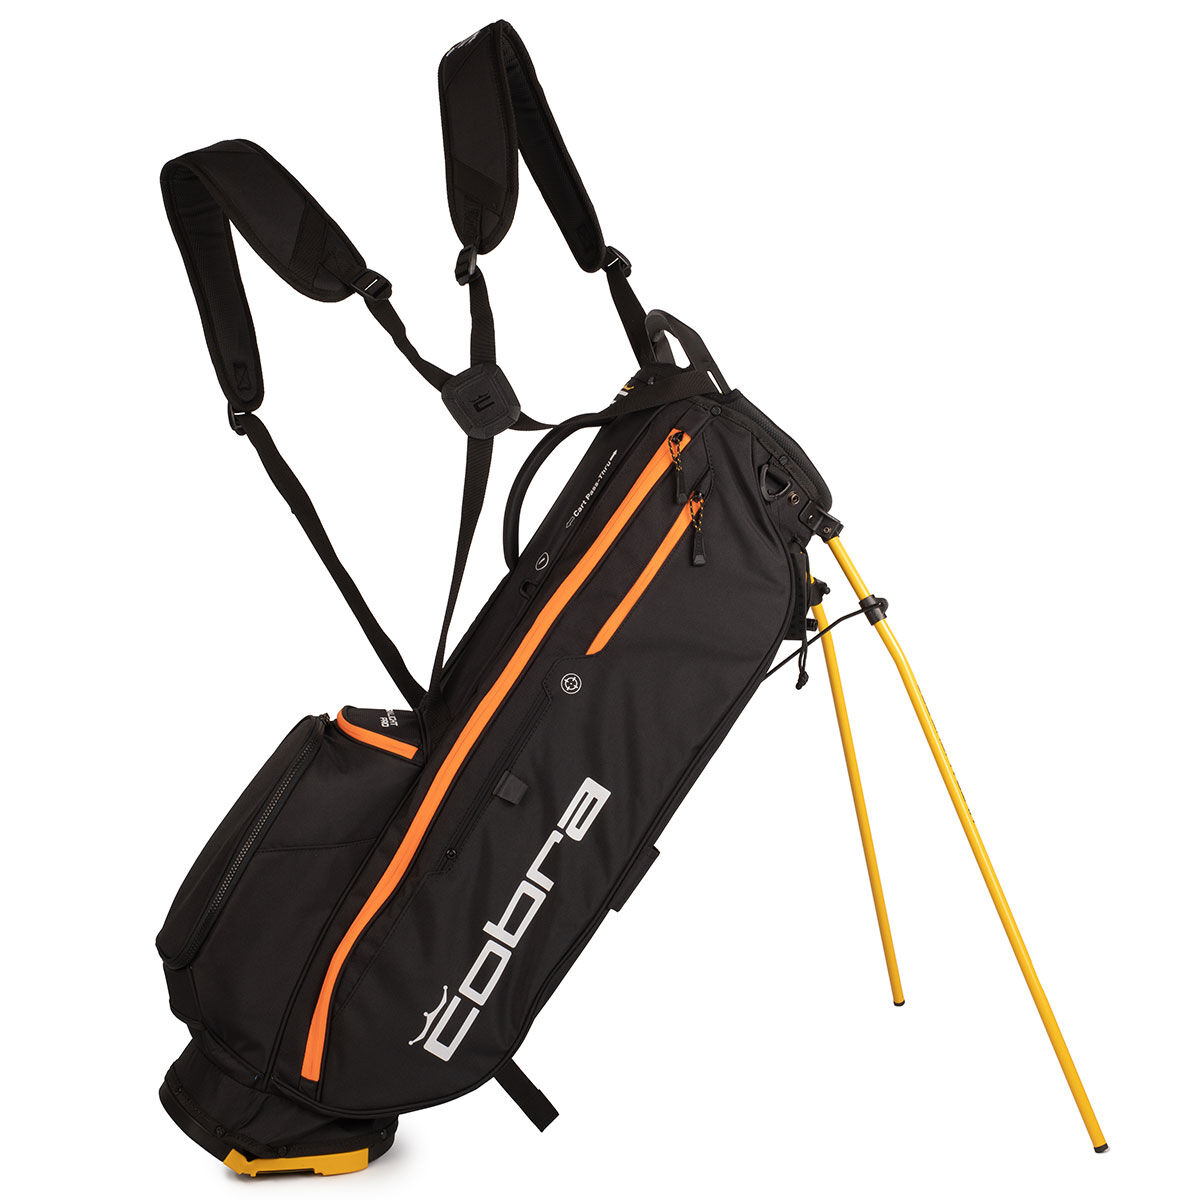 Cobra Golf Black and Gold ULTRALIGHT Pro Golf Stand Bag | American Golf, One Size